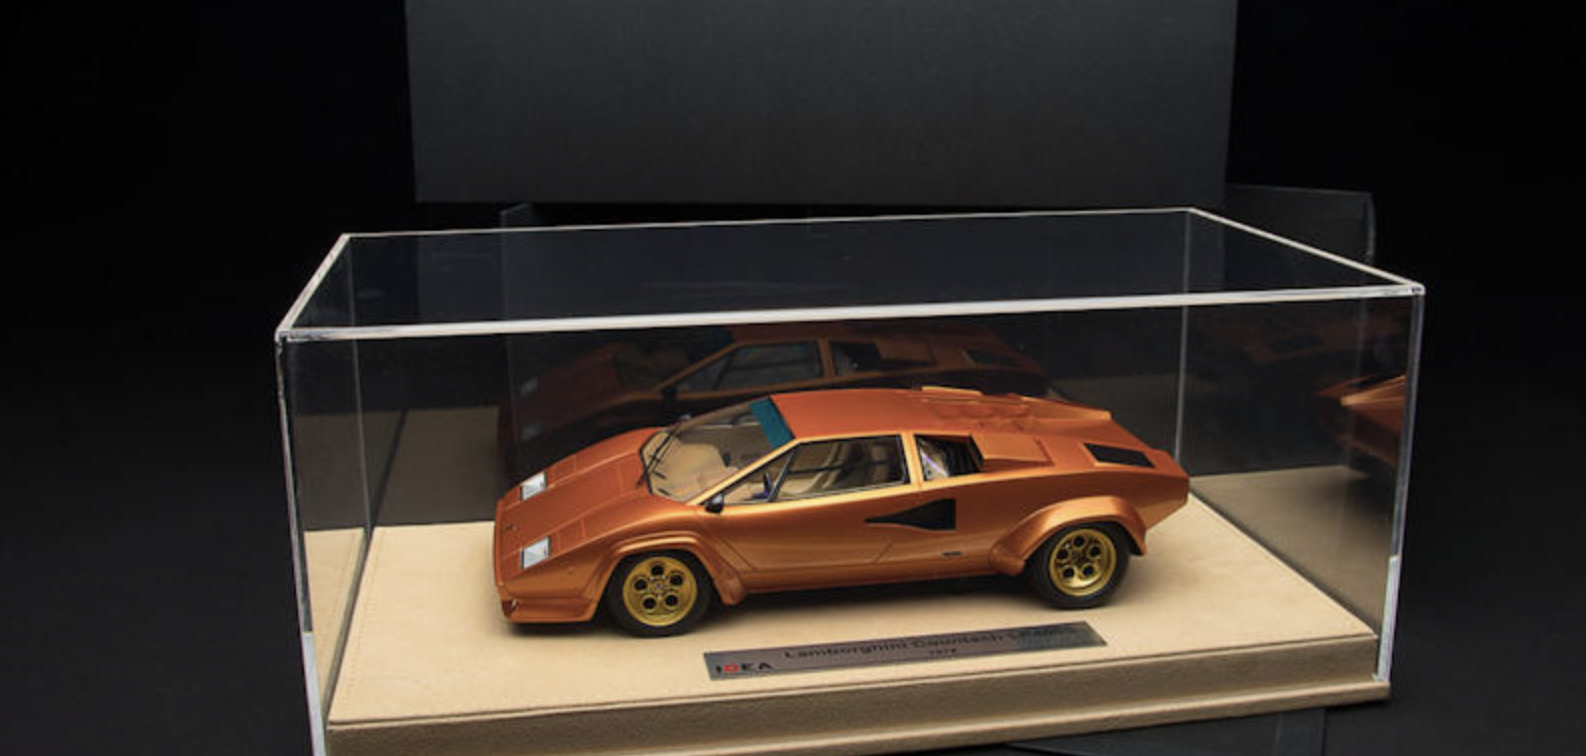 Model cars and collectibles